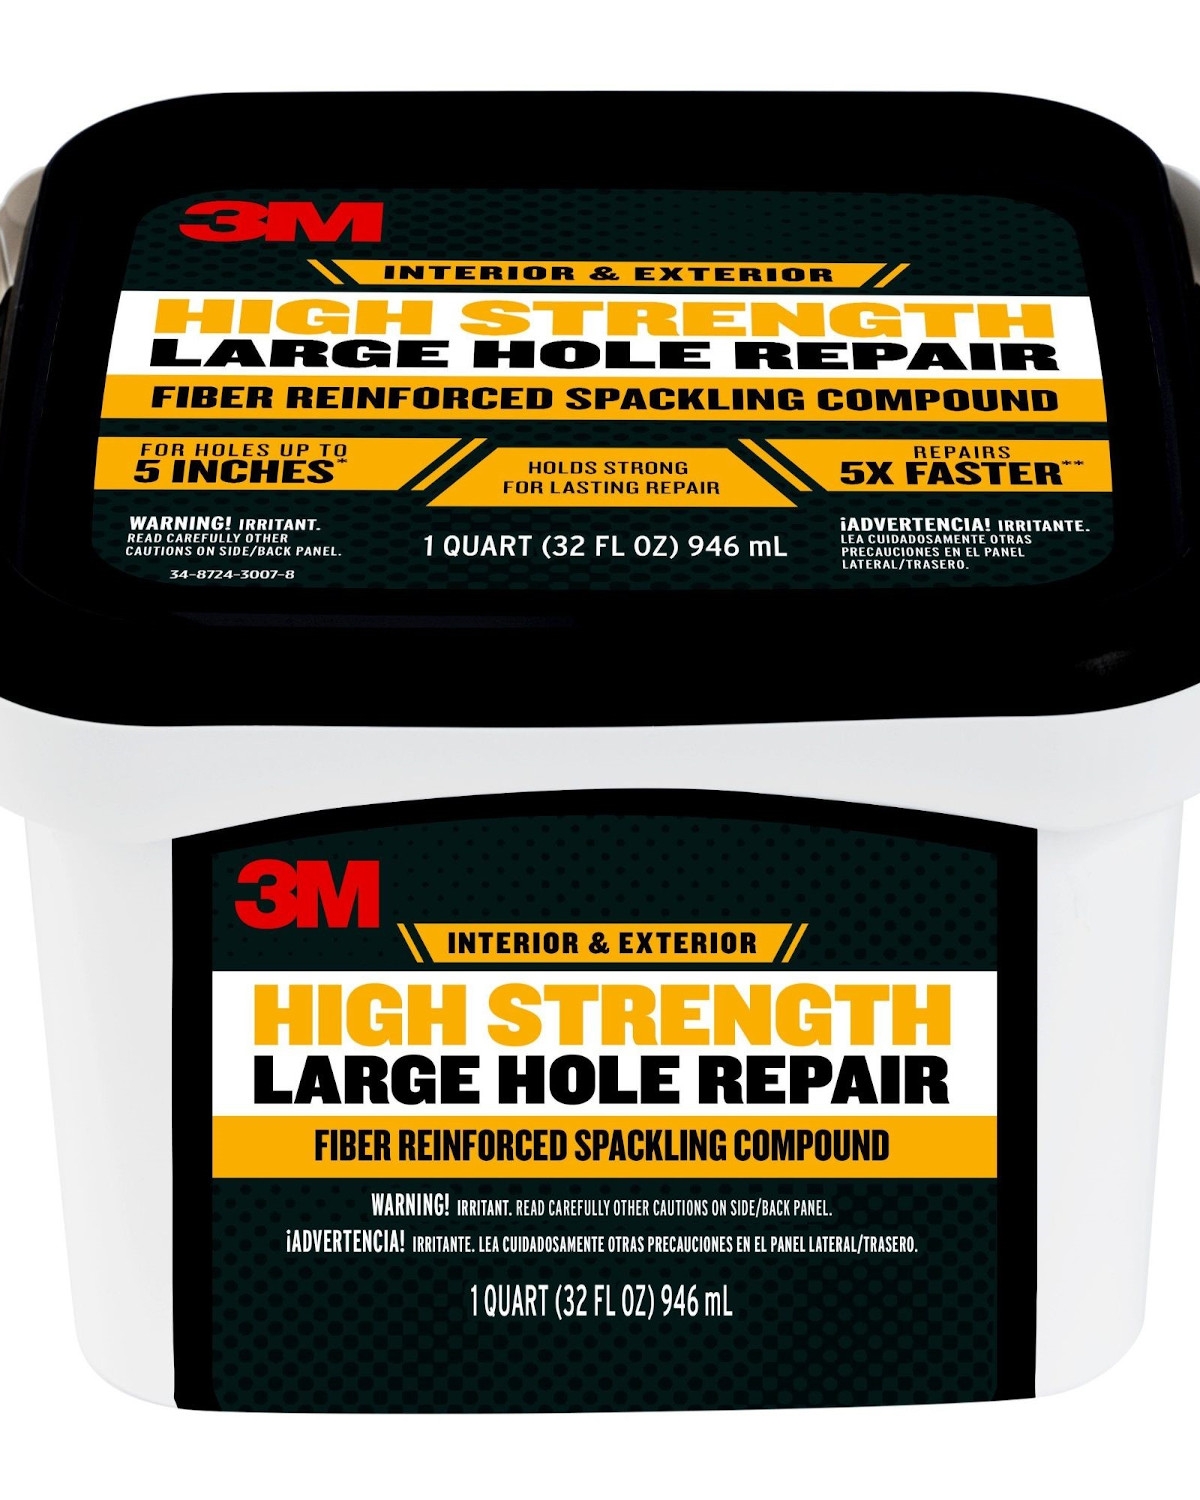 3M compound in packaging